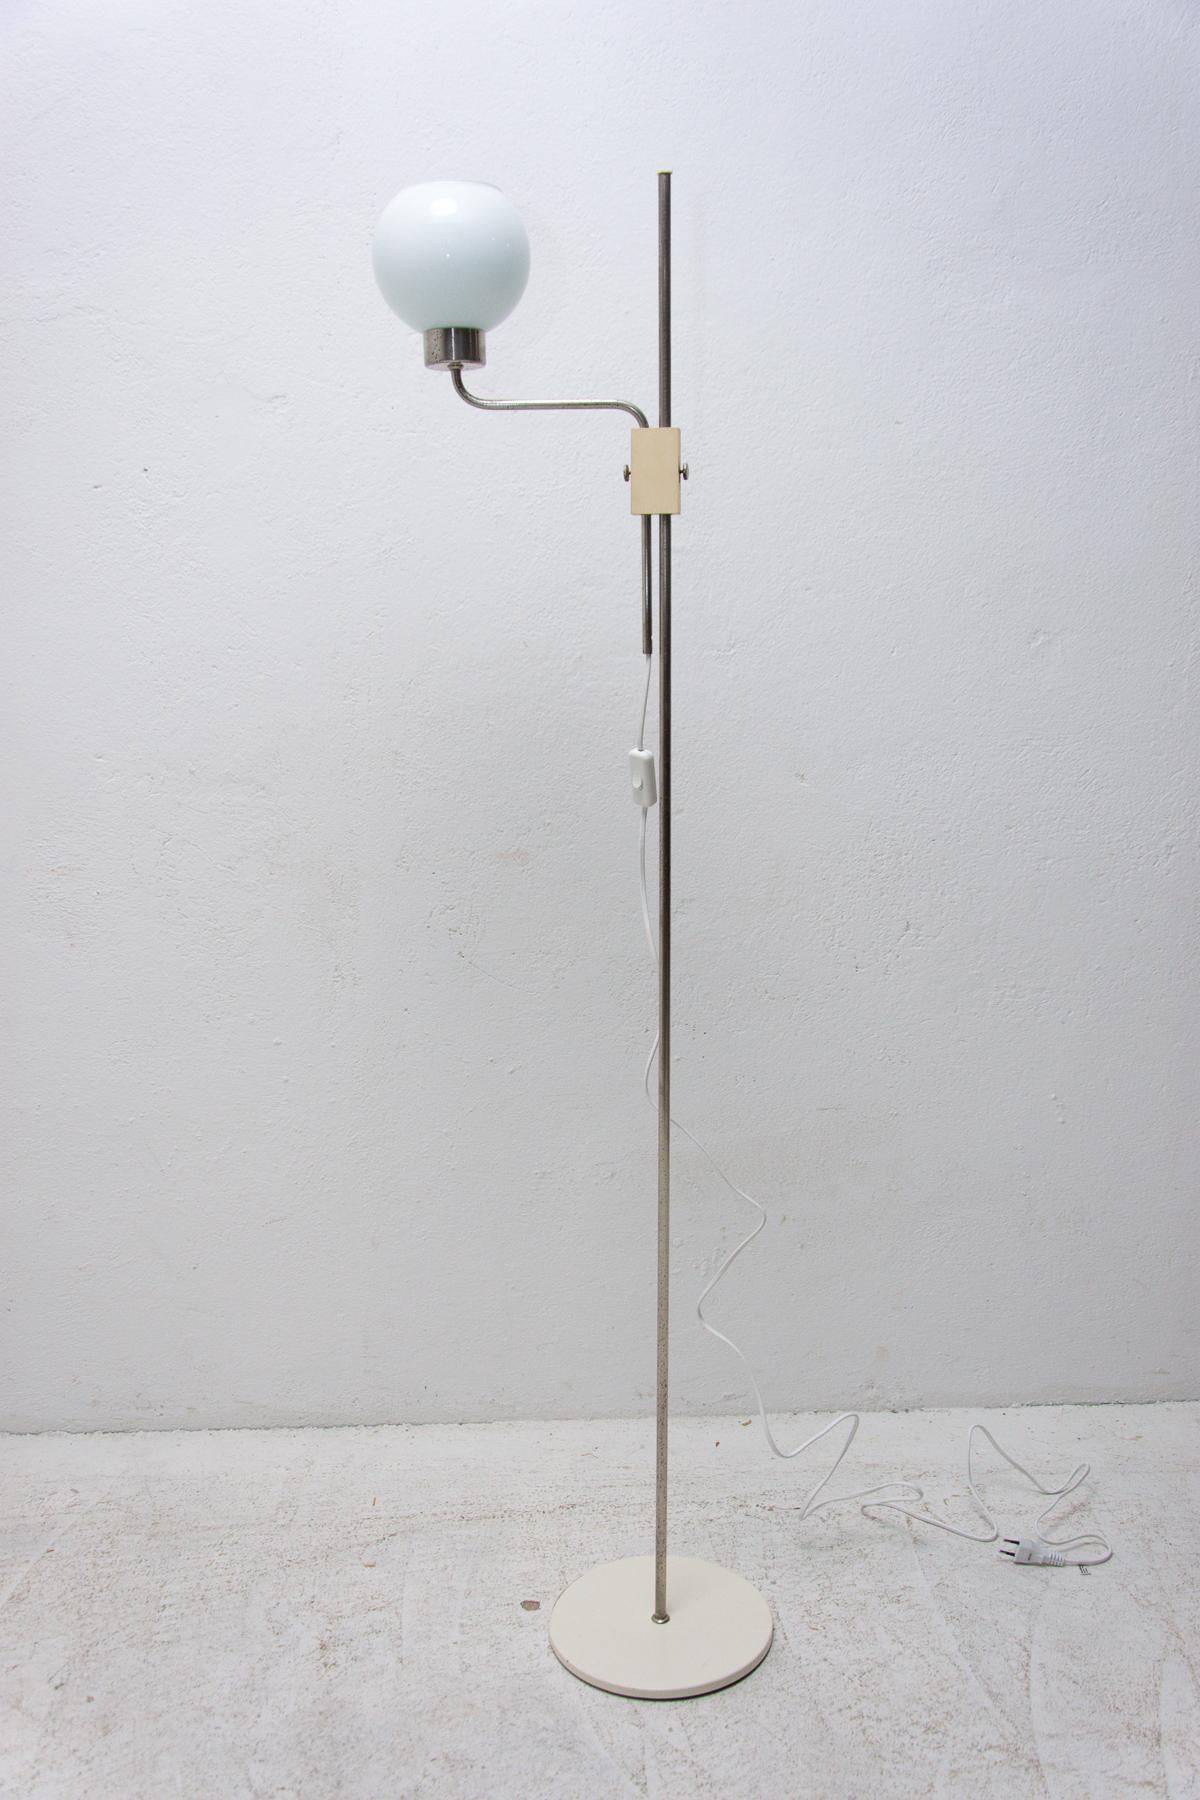 Upcycled chrome floor lamp, corresponds to the design of the so-called “Brussels period” and the world-famous EXPO58.
This simple lamp has a slim stand, the shade is made of milk glass. One E27 bulbs, new wiring.
In very good condition, shows